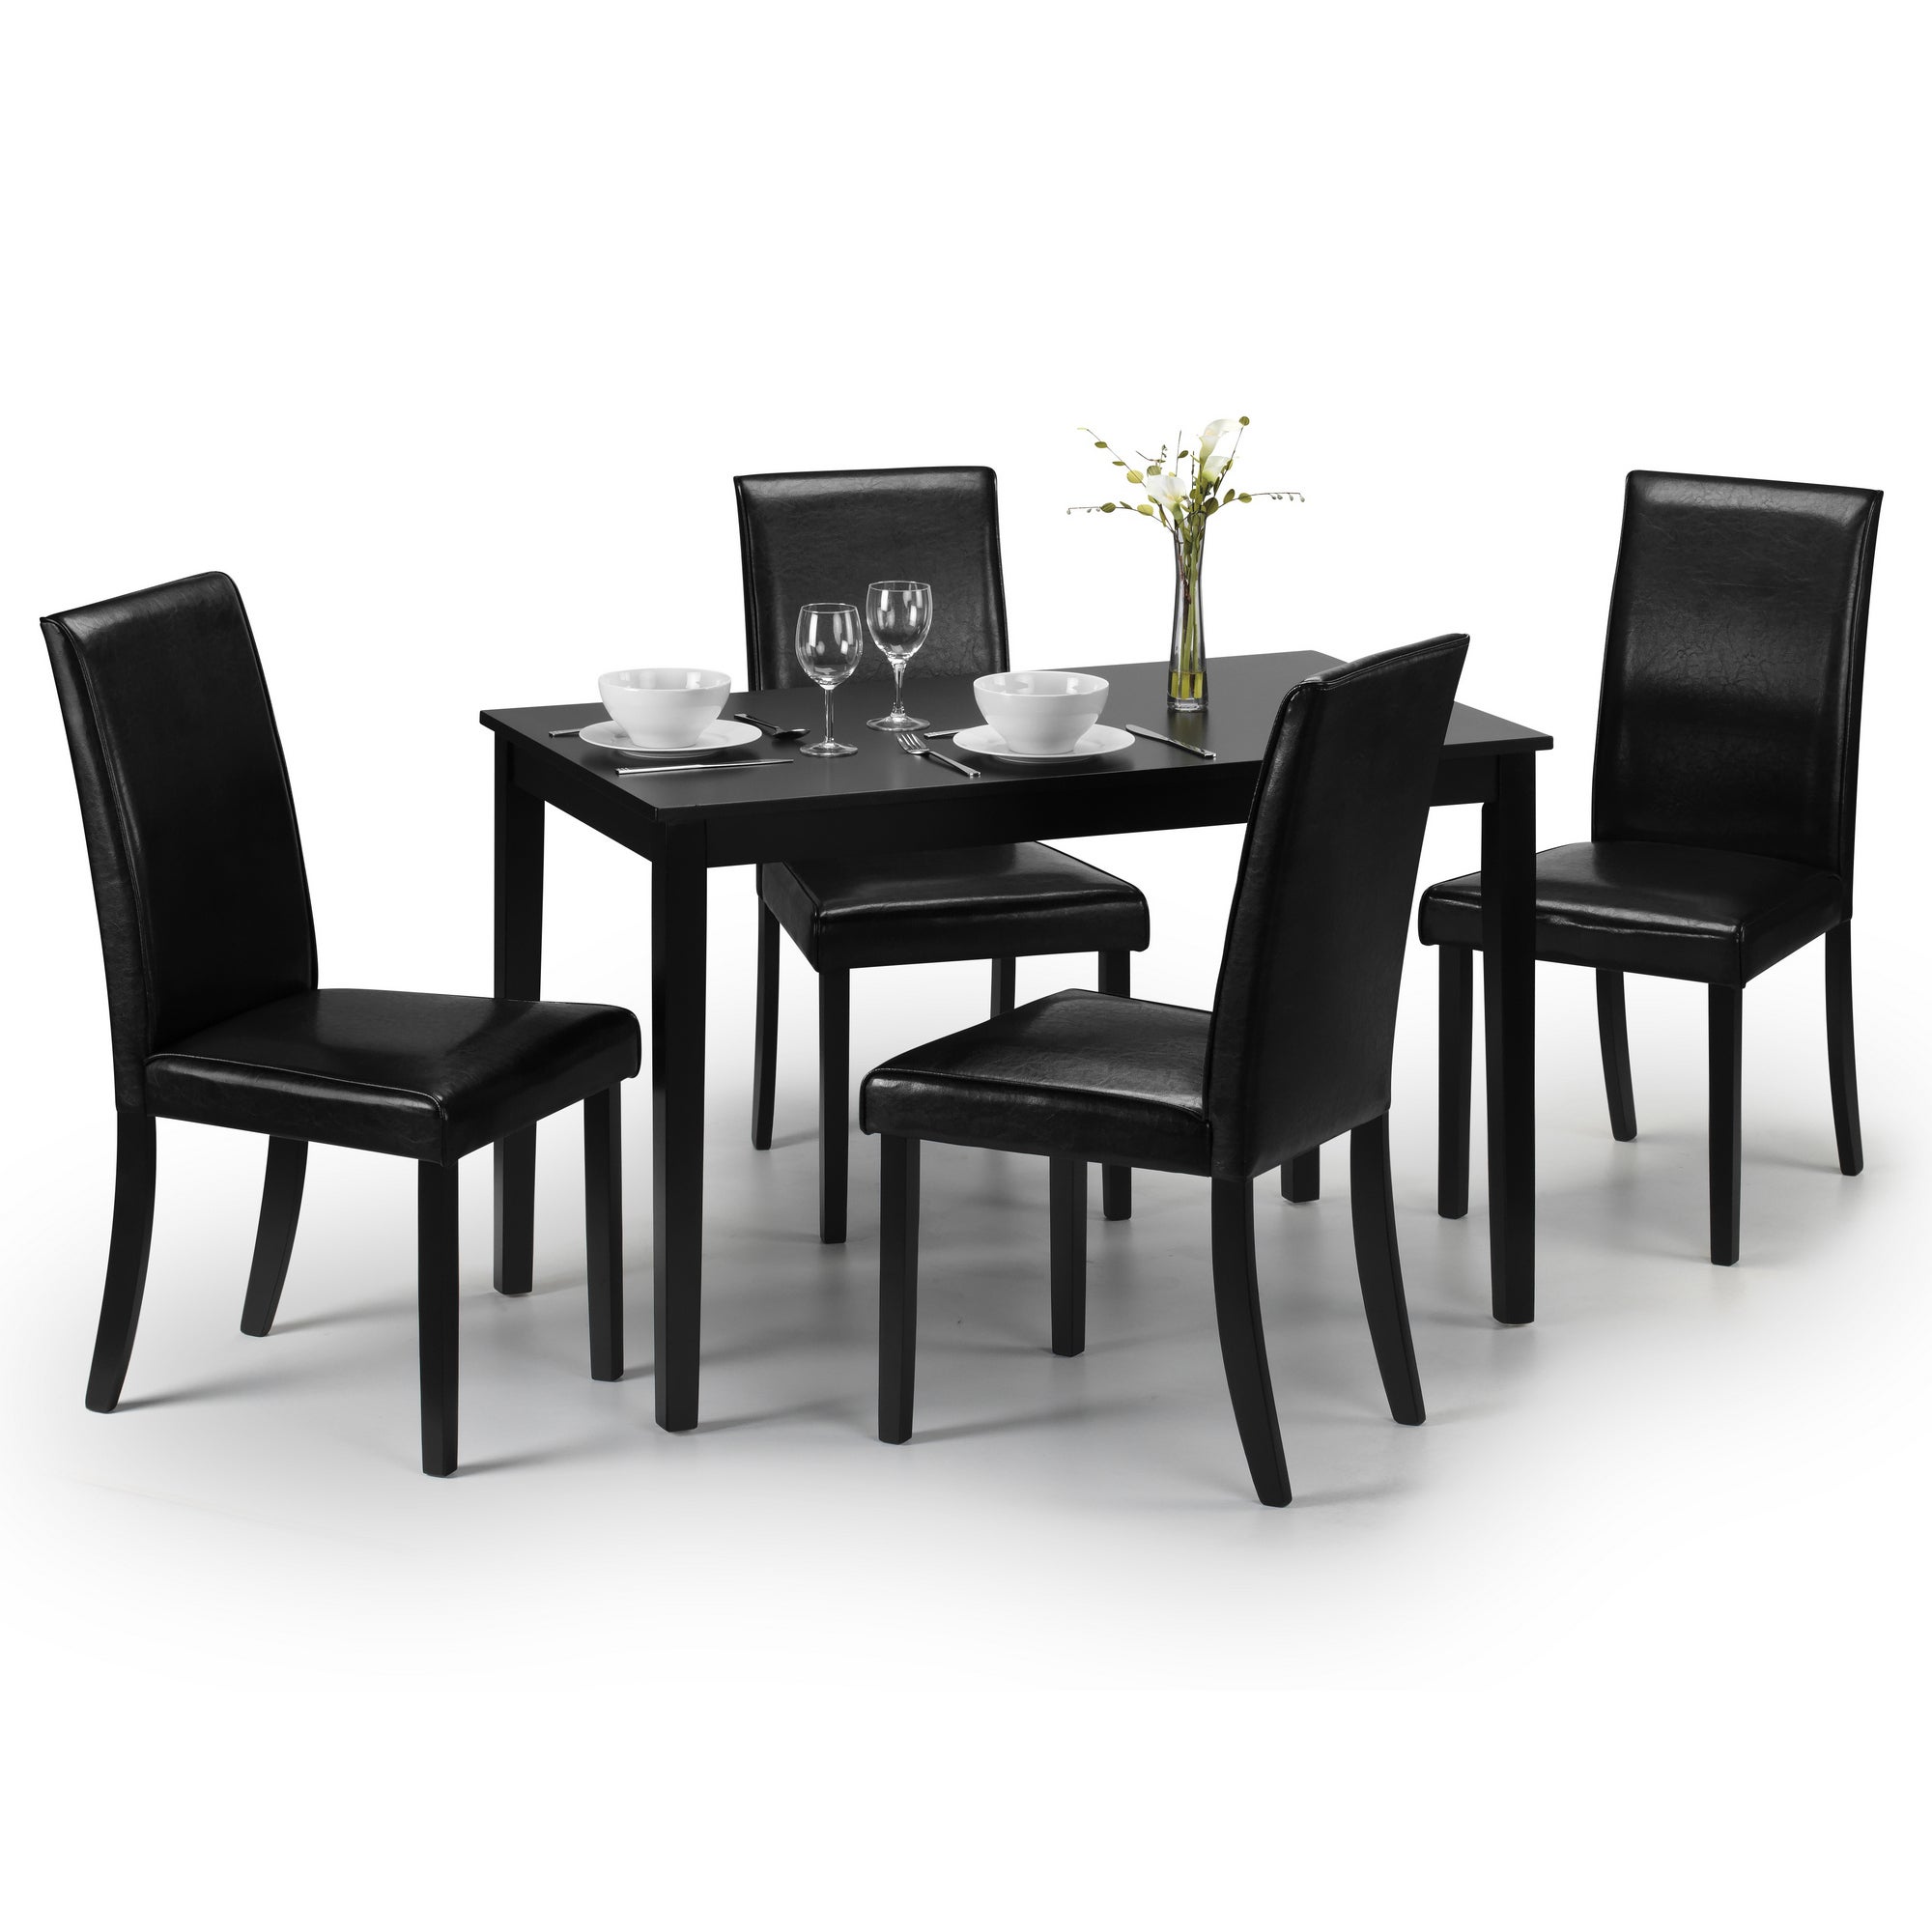 Hudson Round Dining Table with 4 Chairs, Black Black